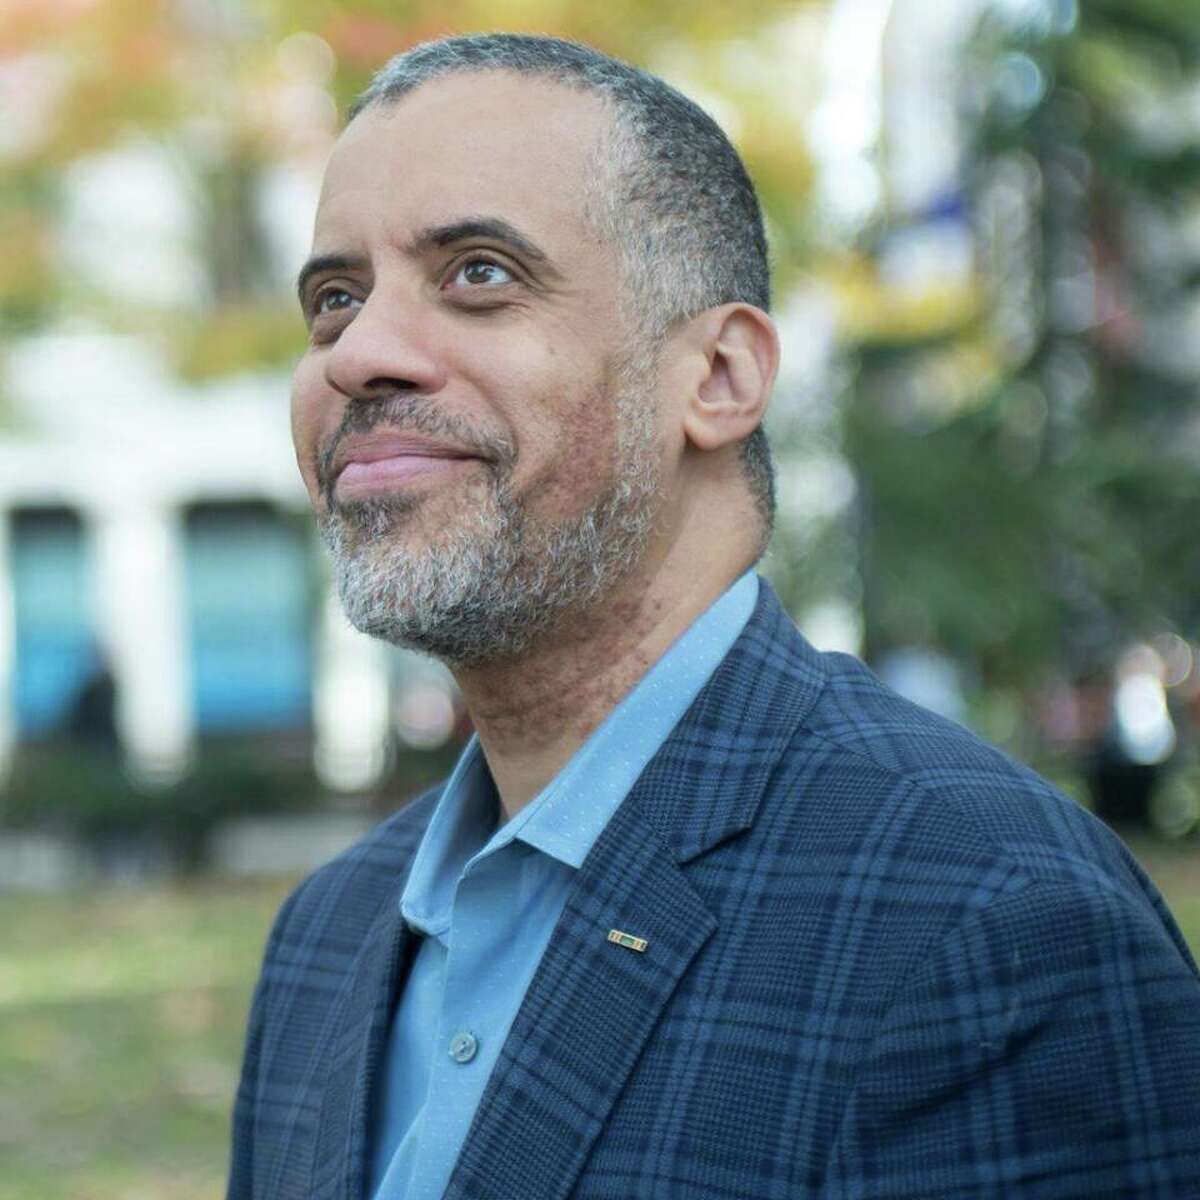 Larry Sharpe is running for governor of New York on the Libertarian line.